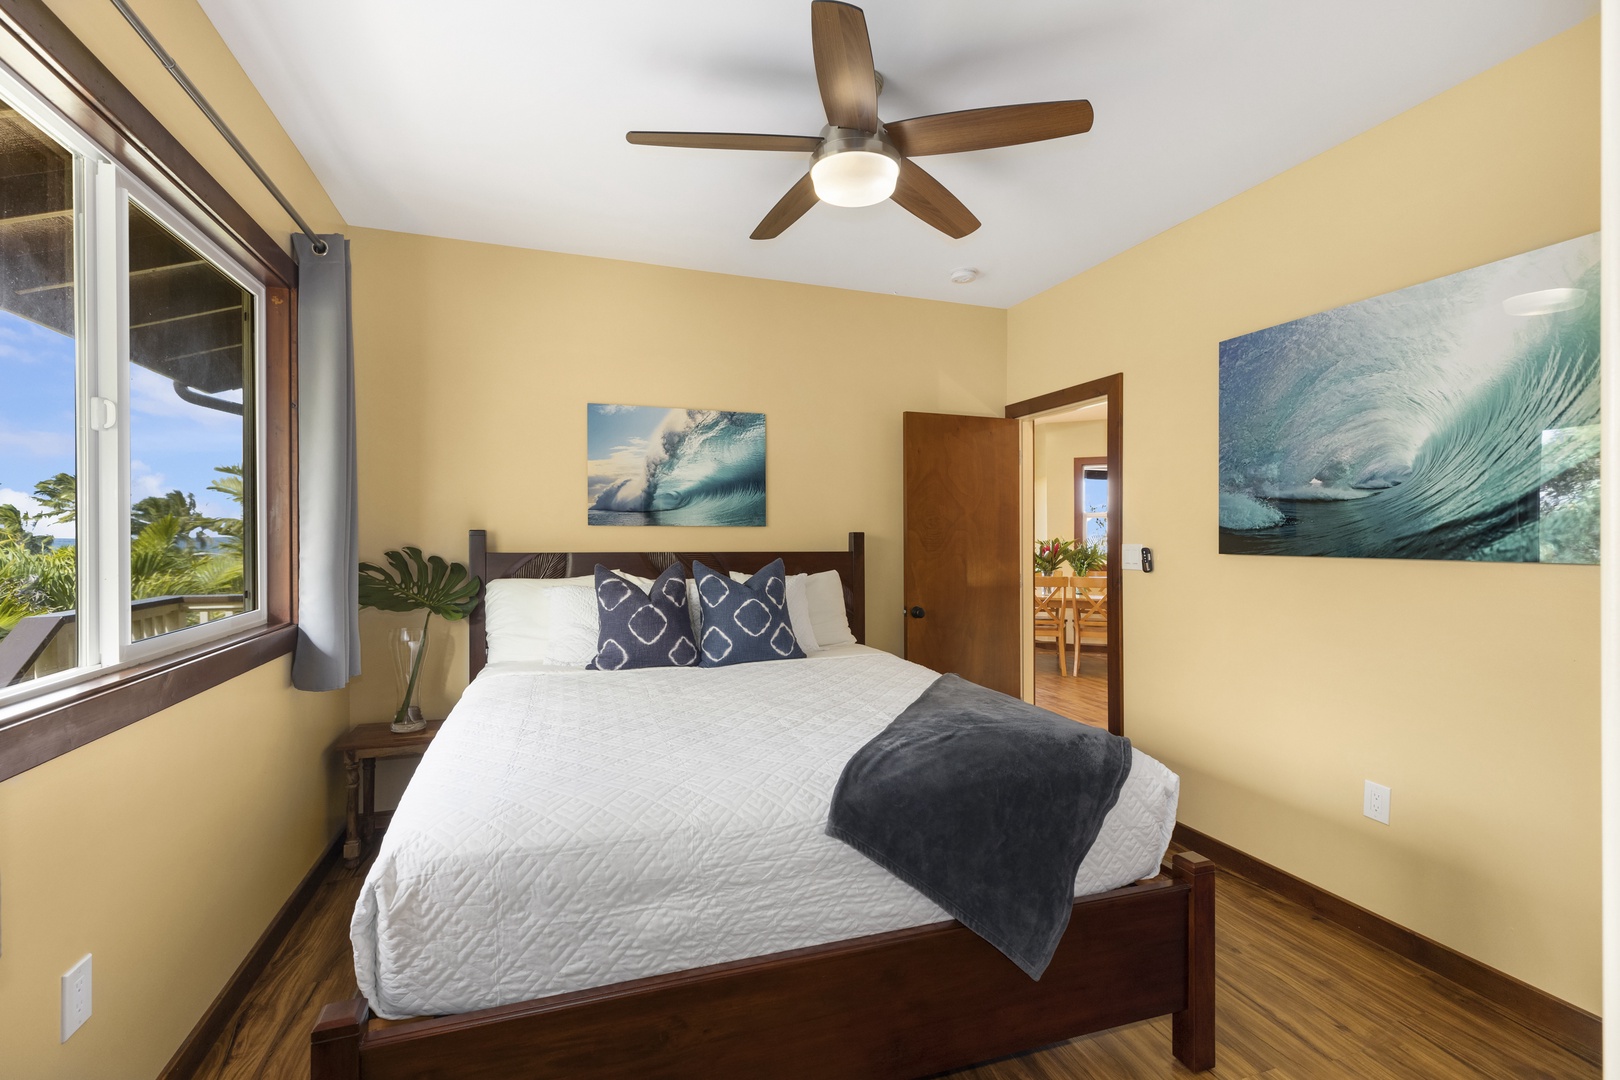 Haleiwa Vacation Rentals, Waimea Dream - The third upstairs bedroom comes furnished with another king-size bed.